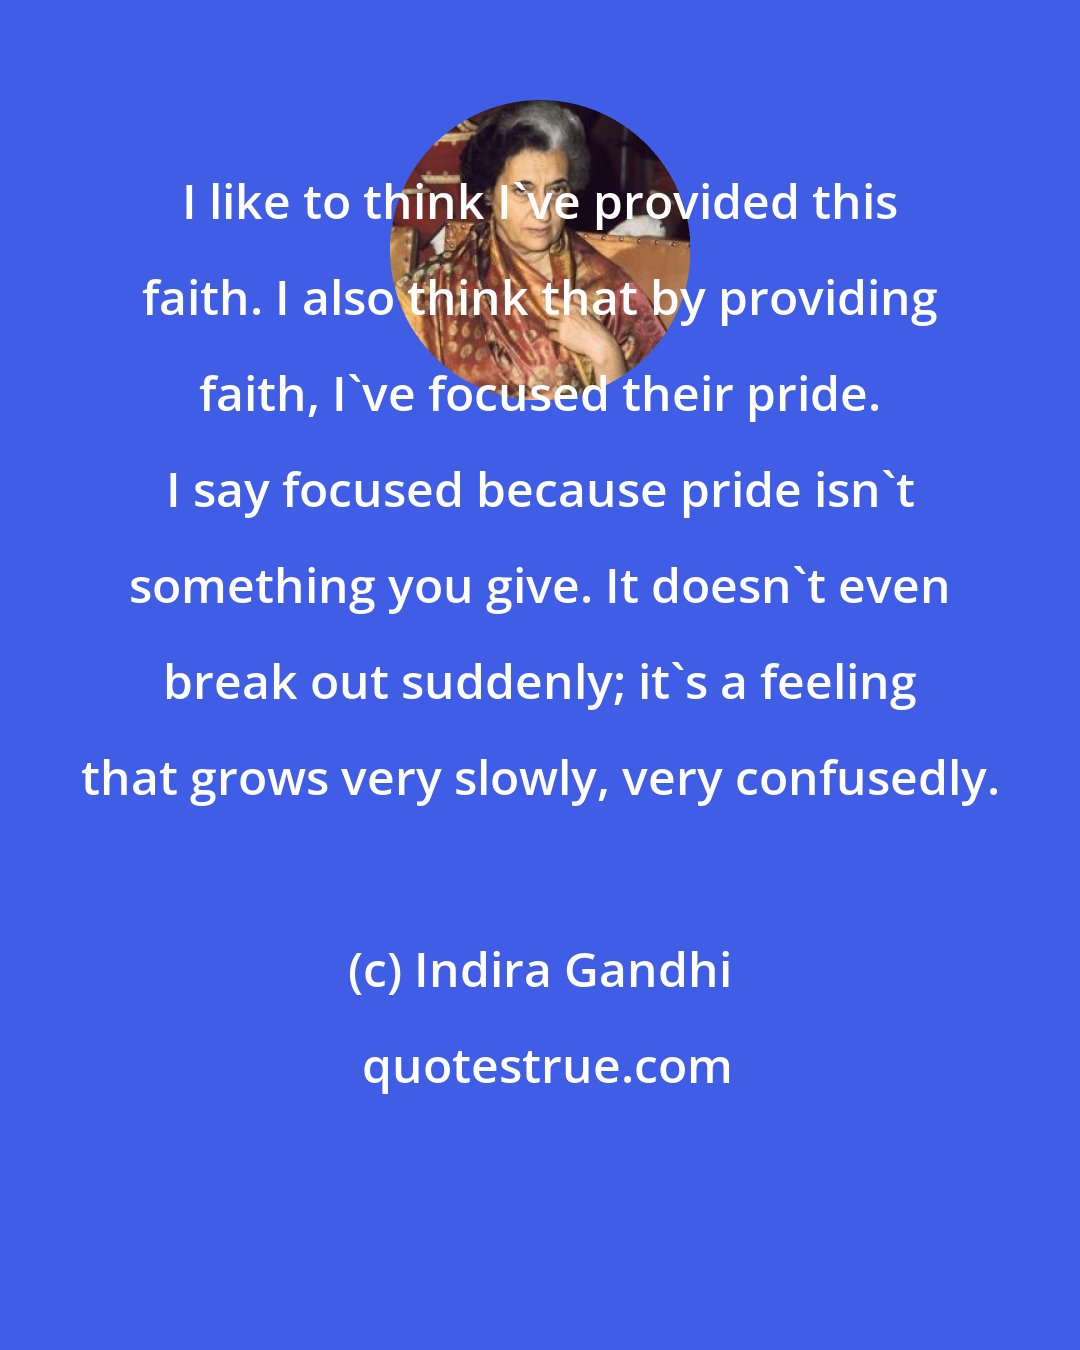 Indira Gandhi: I like to think I've provided this faith. I also think that by providing faith, I've focused their pride. I say focused because pride isn't something you give. It doesn't even break out suddenly; it's a feeling that grows very slowly, very confusedly.